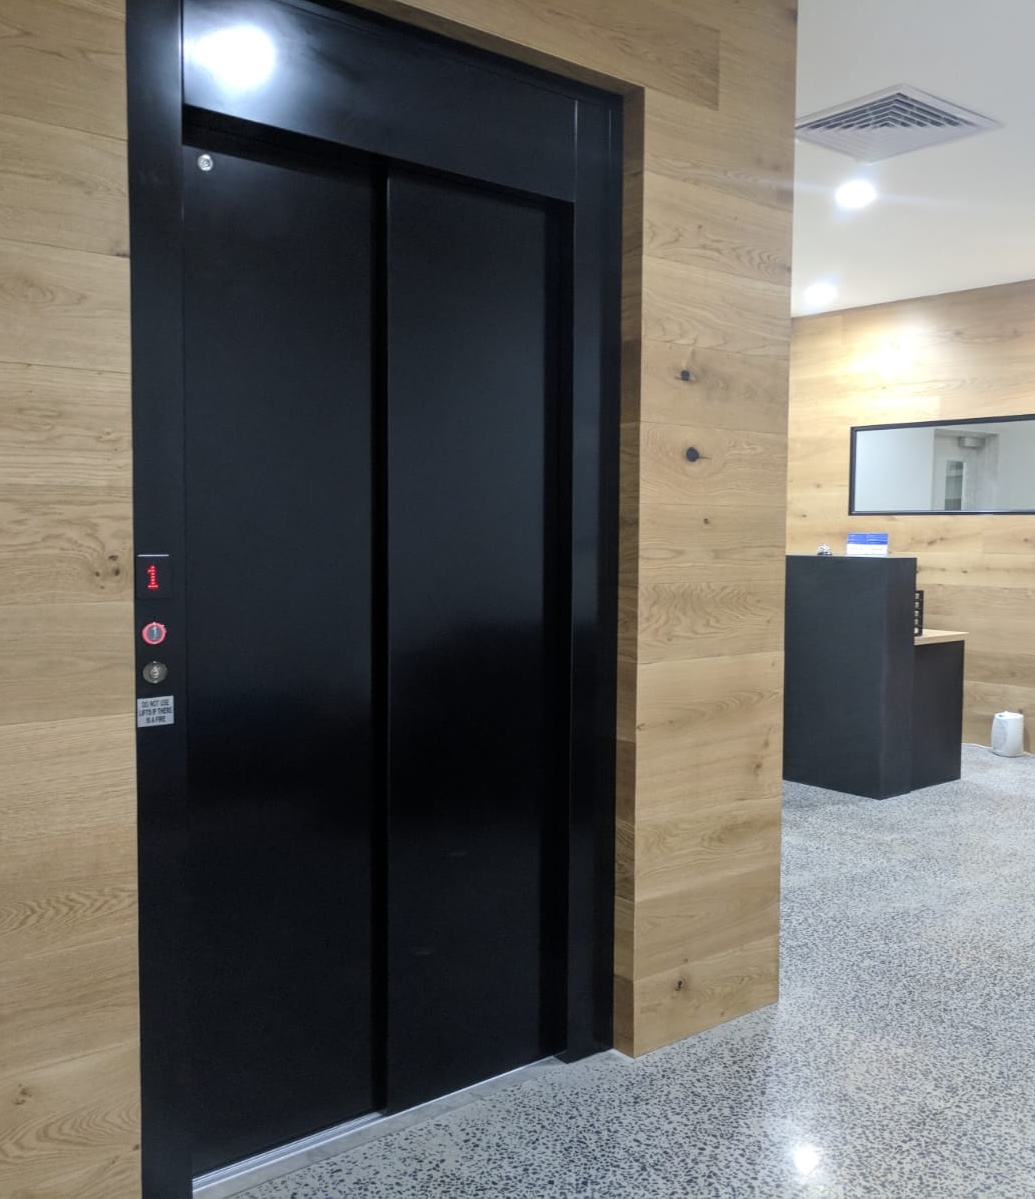 Should You Upgrade or Replace Your Commercial Lift? 2